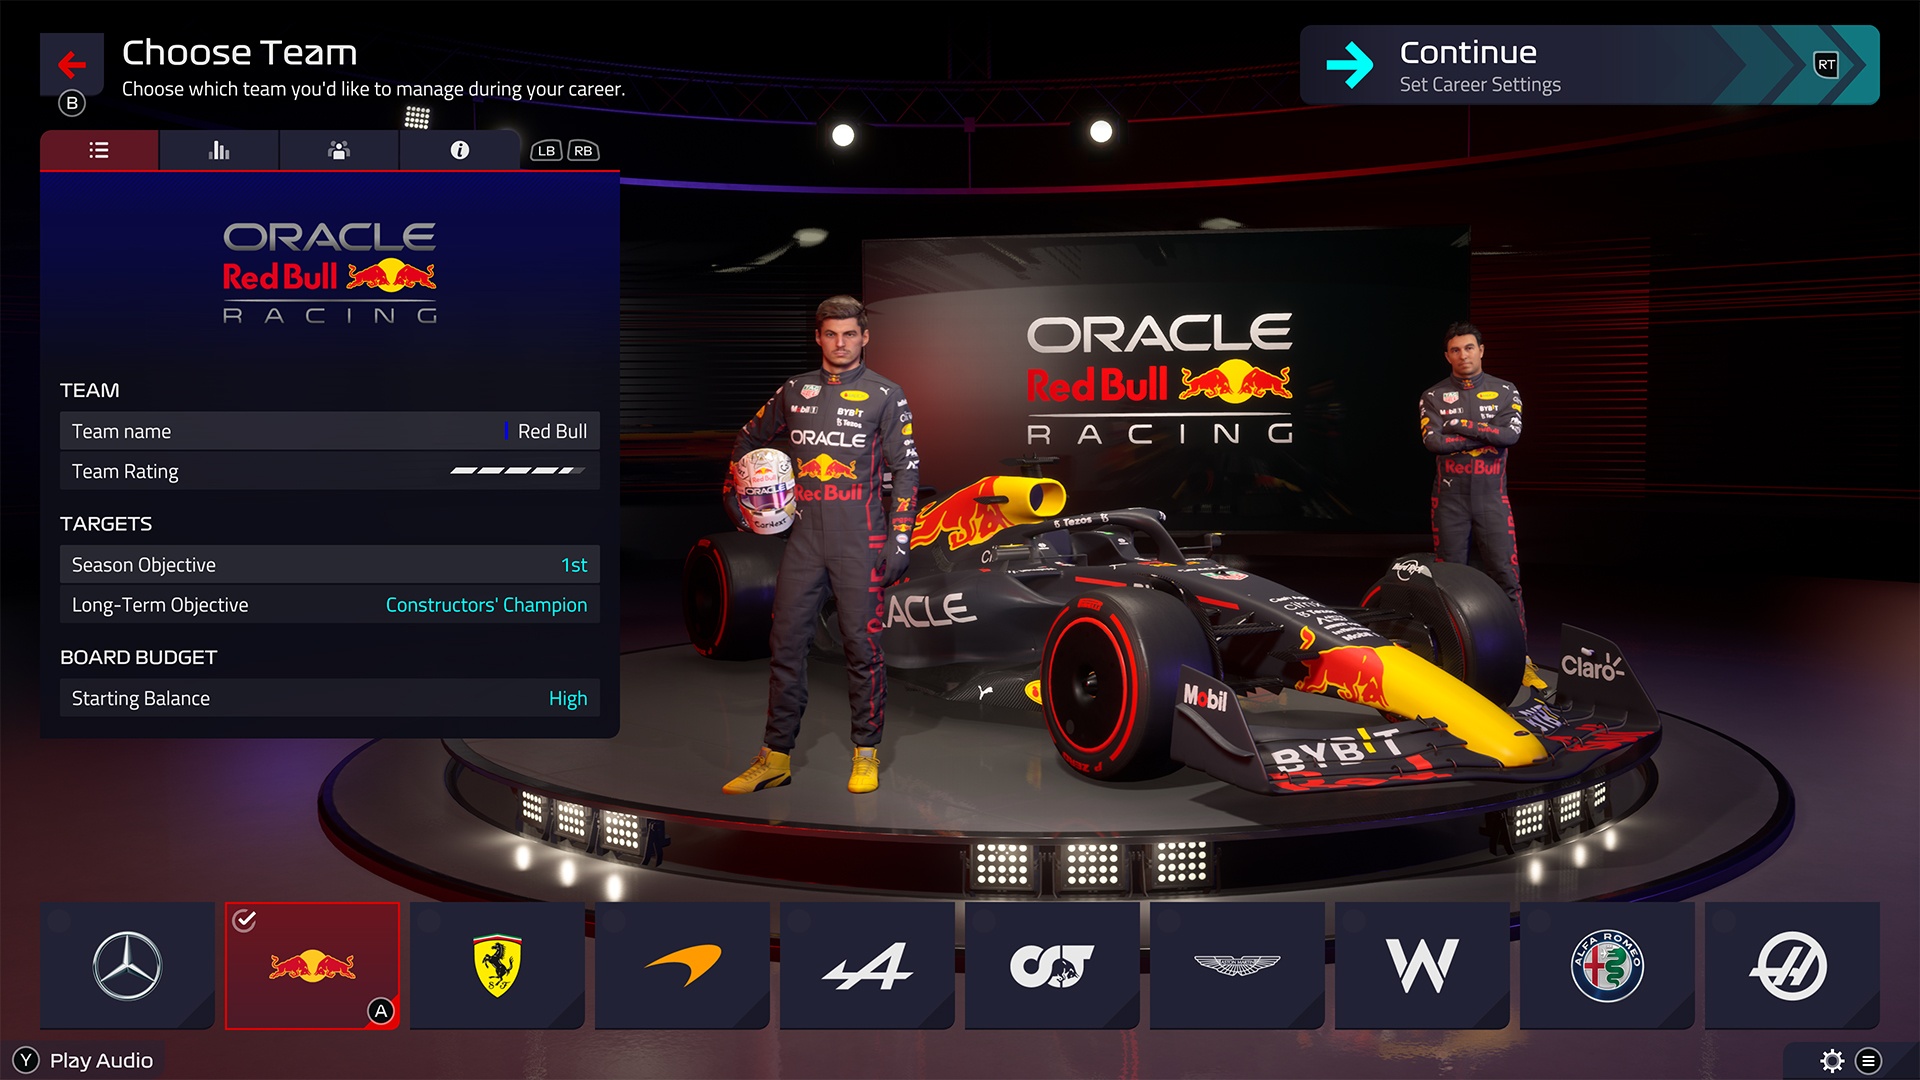 F1 Manager 2023 Announced, Coming to PC and Consoles This Summer